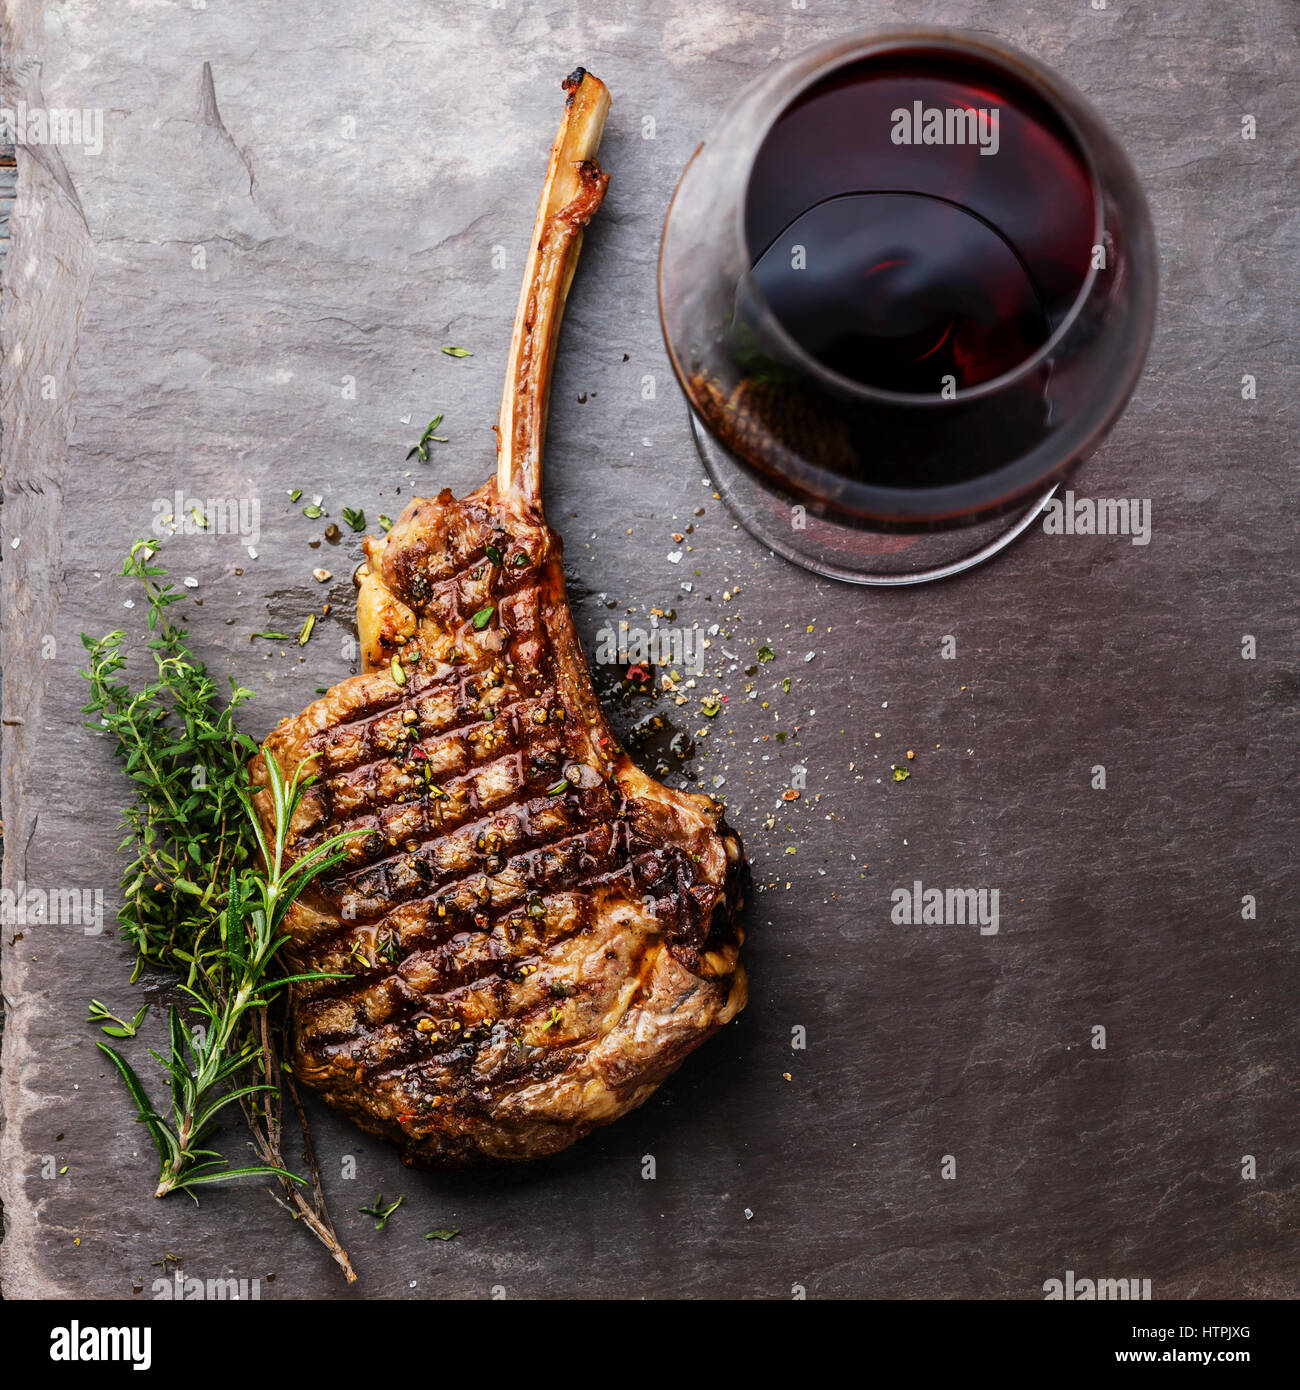 Grilled beef barbecue Veal rib Steak on bone and red wine on stone slate background Stock Photo